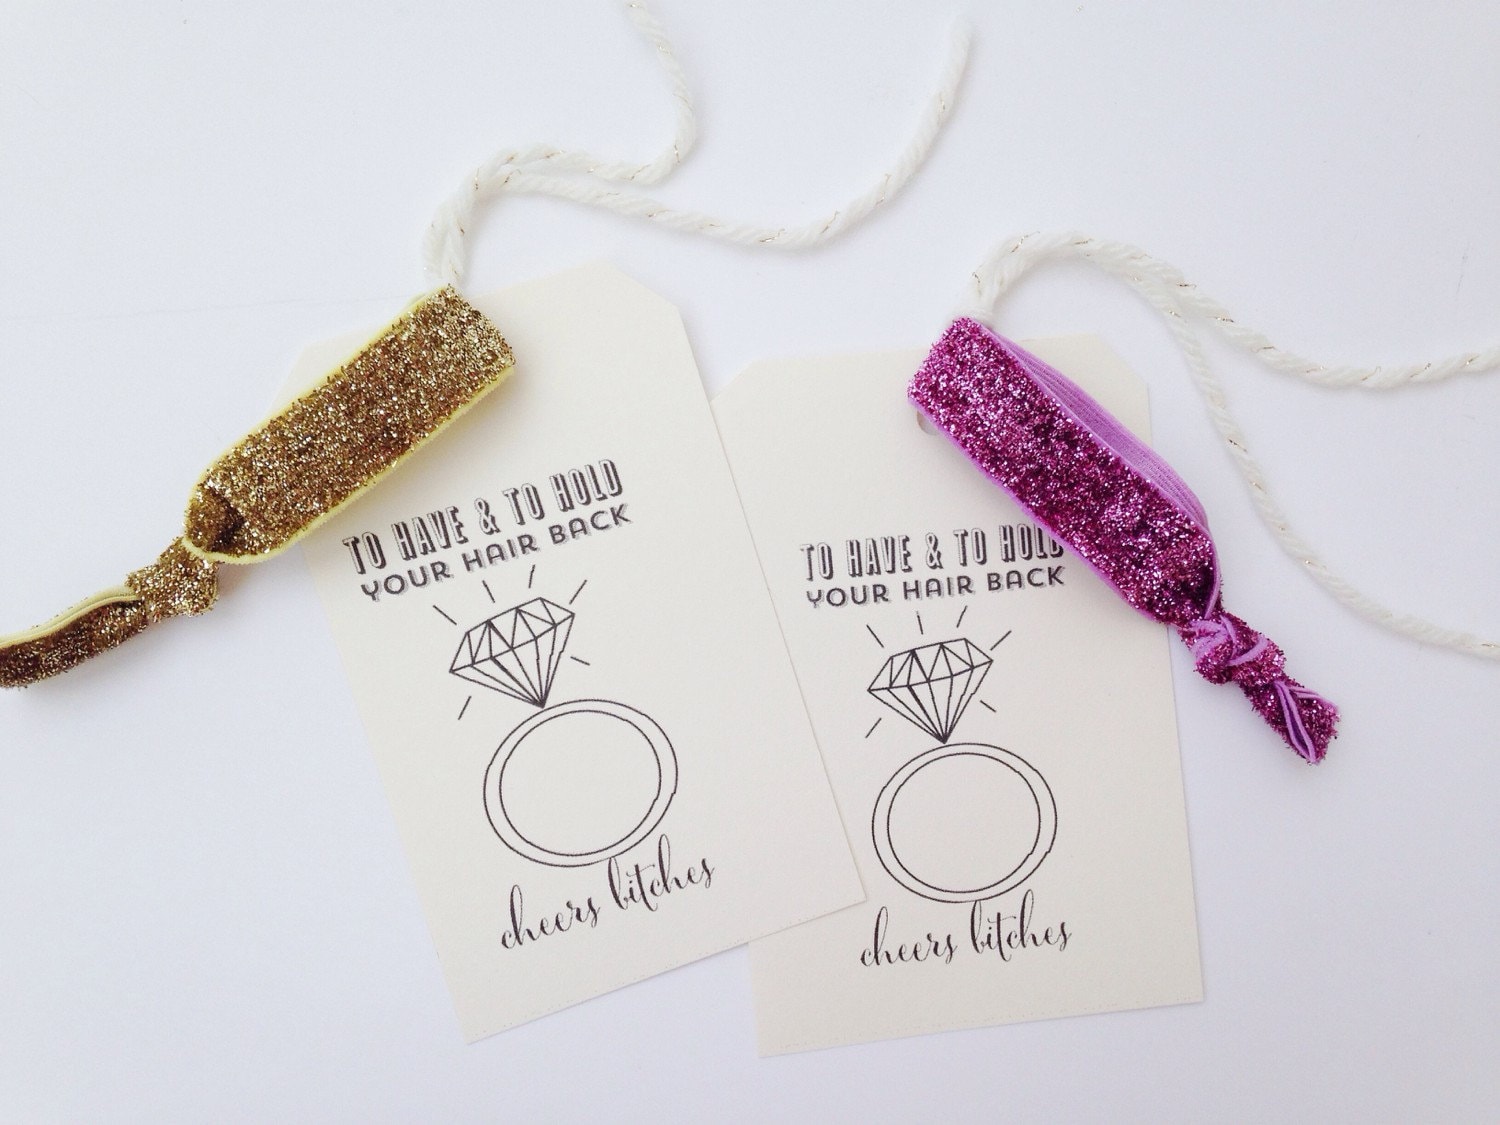 To Have and To Hold Your Hair Back Bridesmaid Gifts Bridal